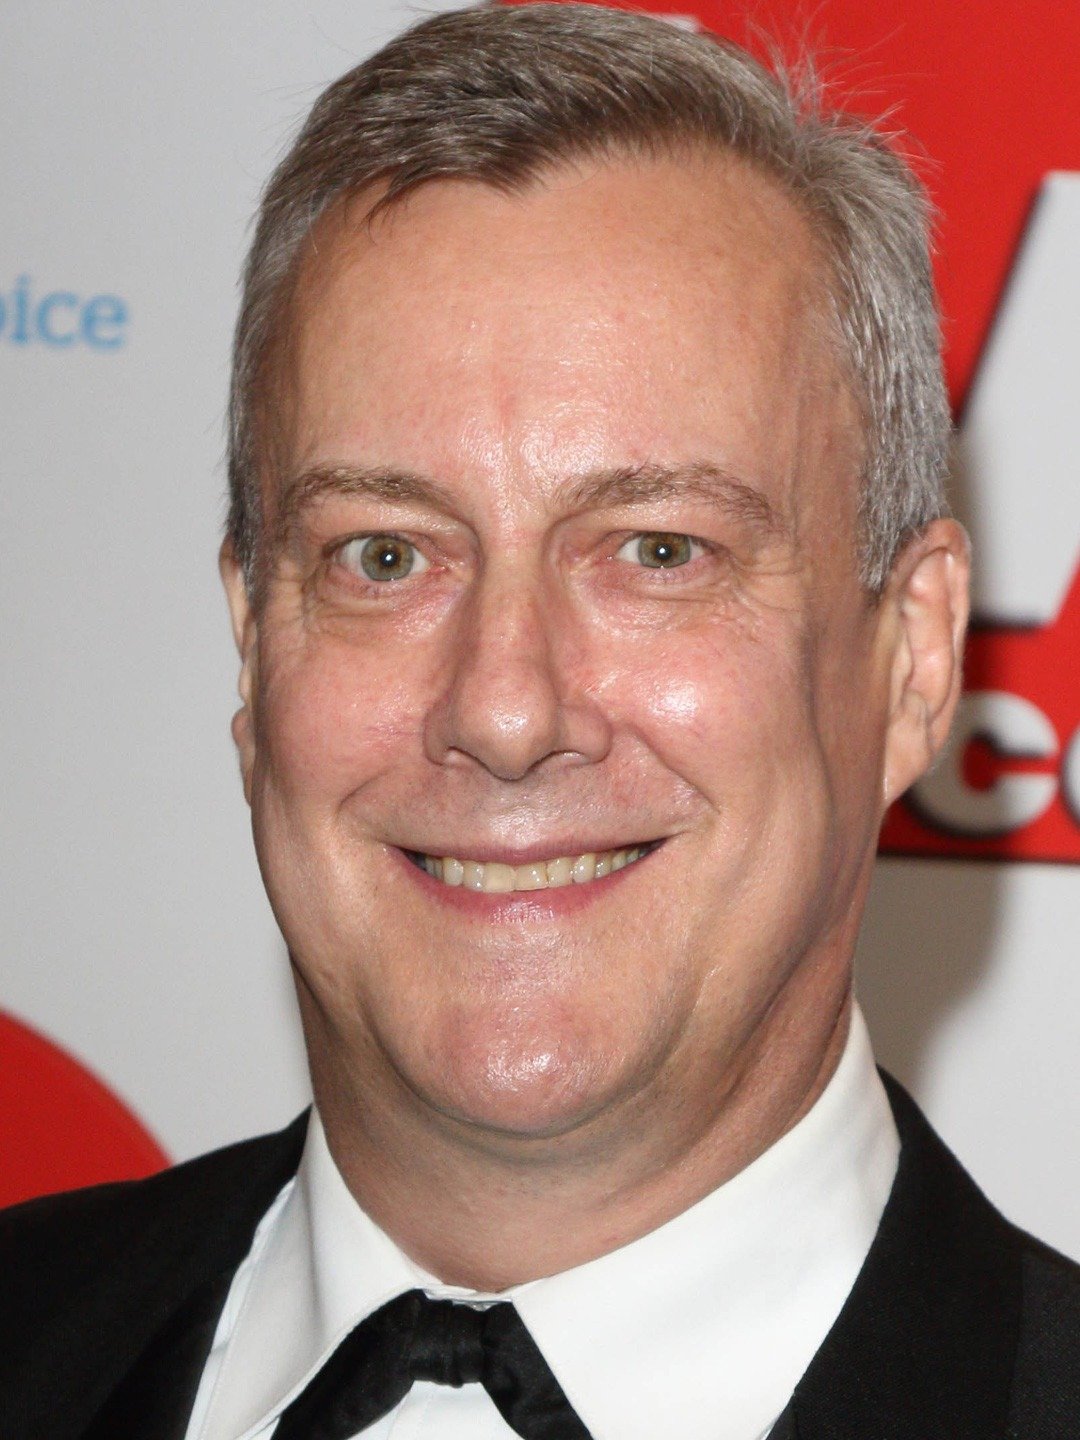 How tall is Stephen Tompkinson?